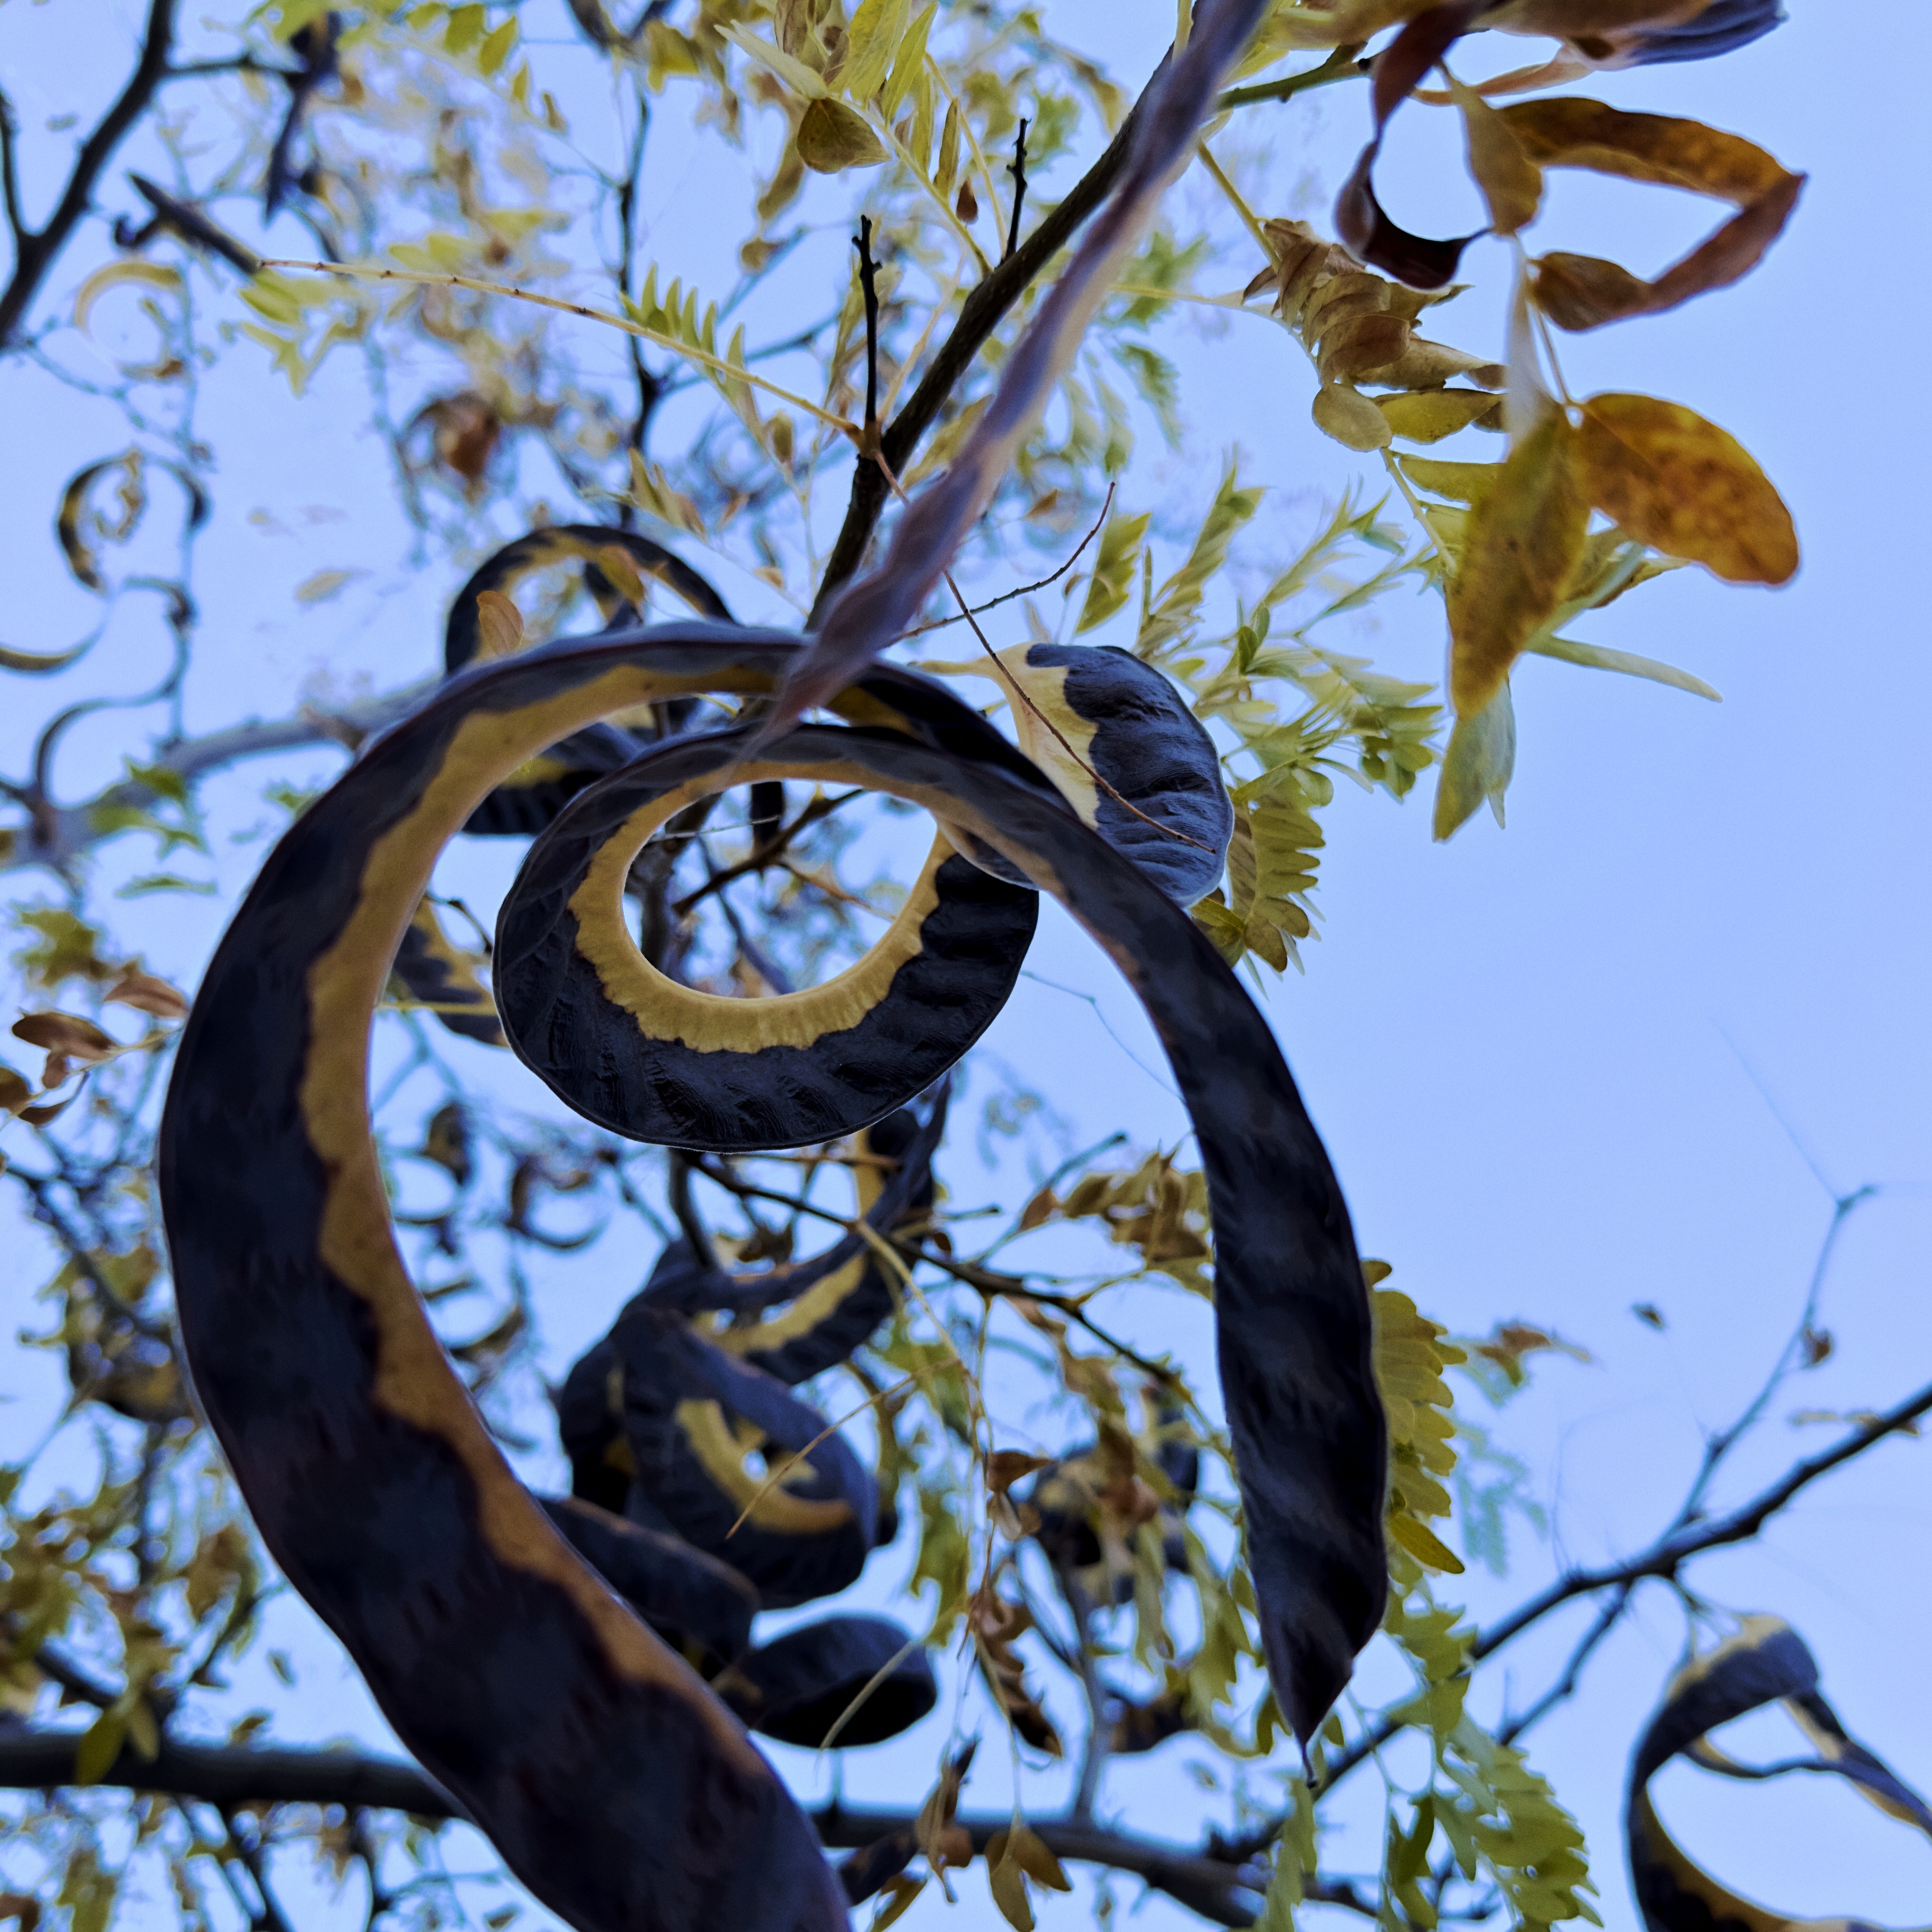 A spiral-shaped dried seed pod hanging from a tree. It is dark brown with a yellow ribbon along its edge. Shot from below, the bright blue sky shows above it.